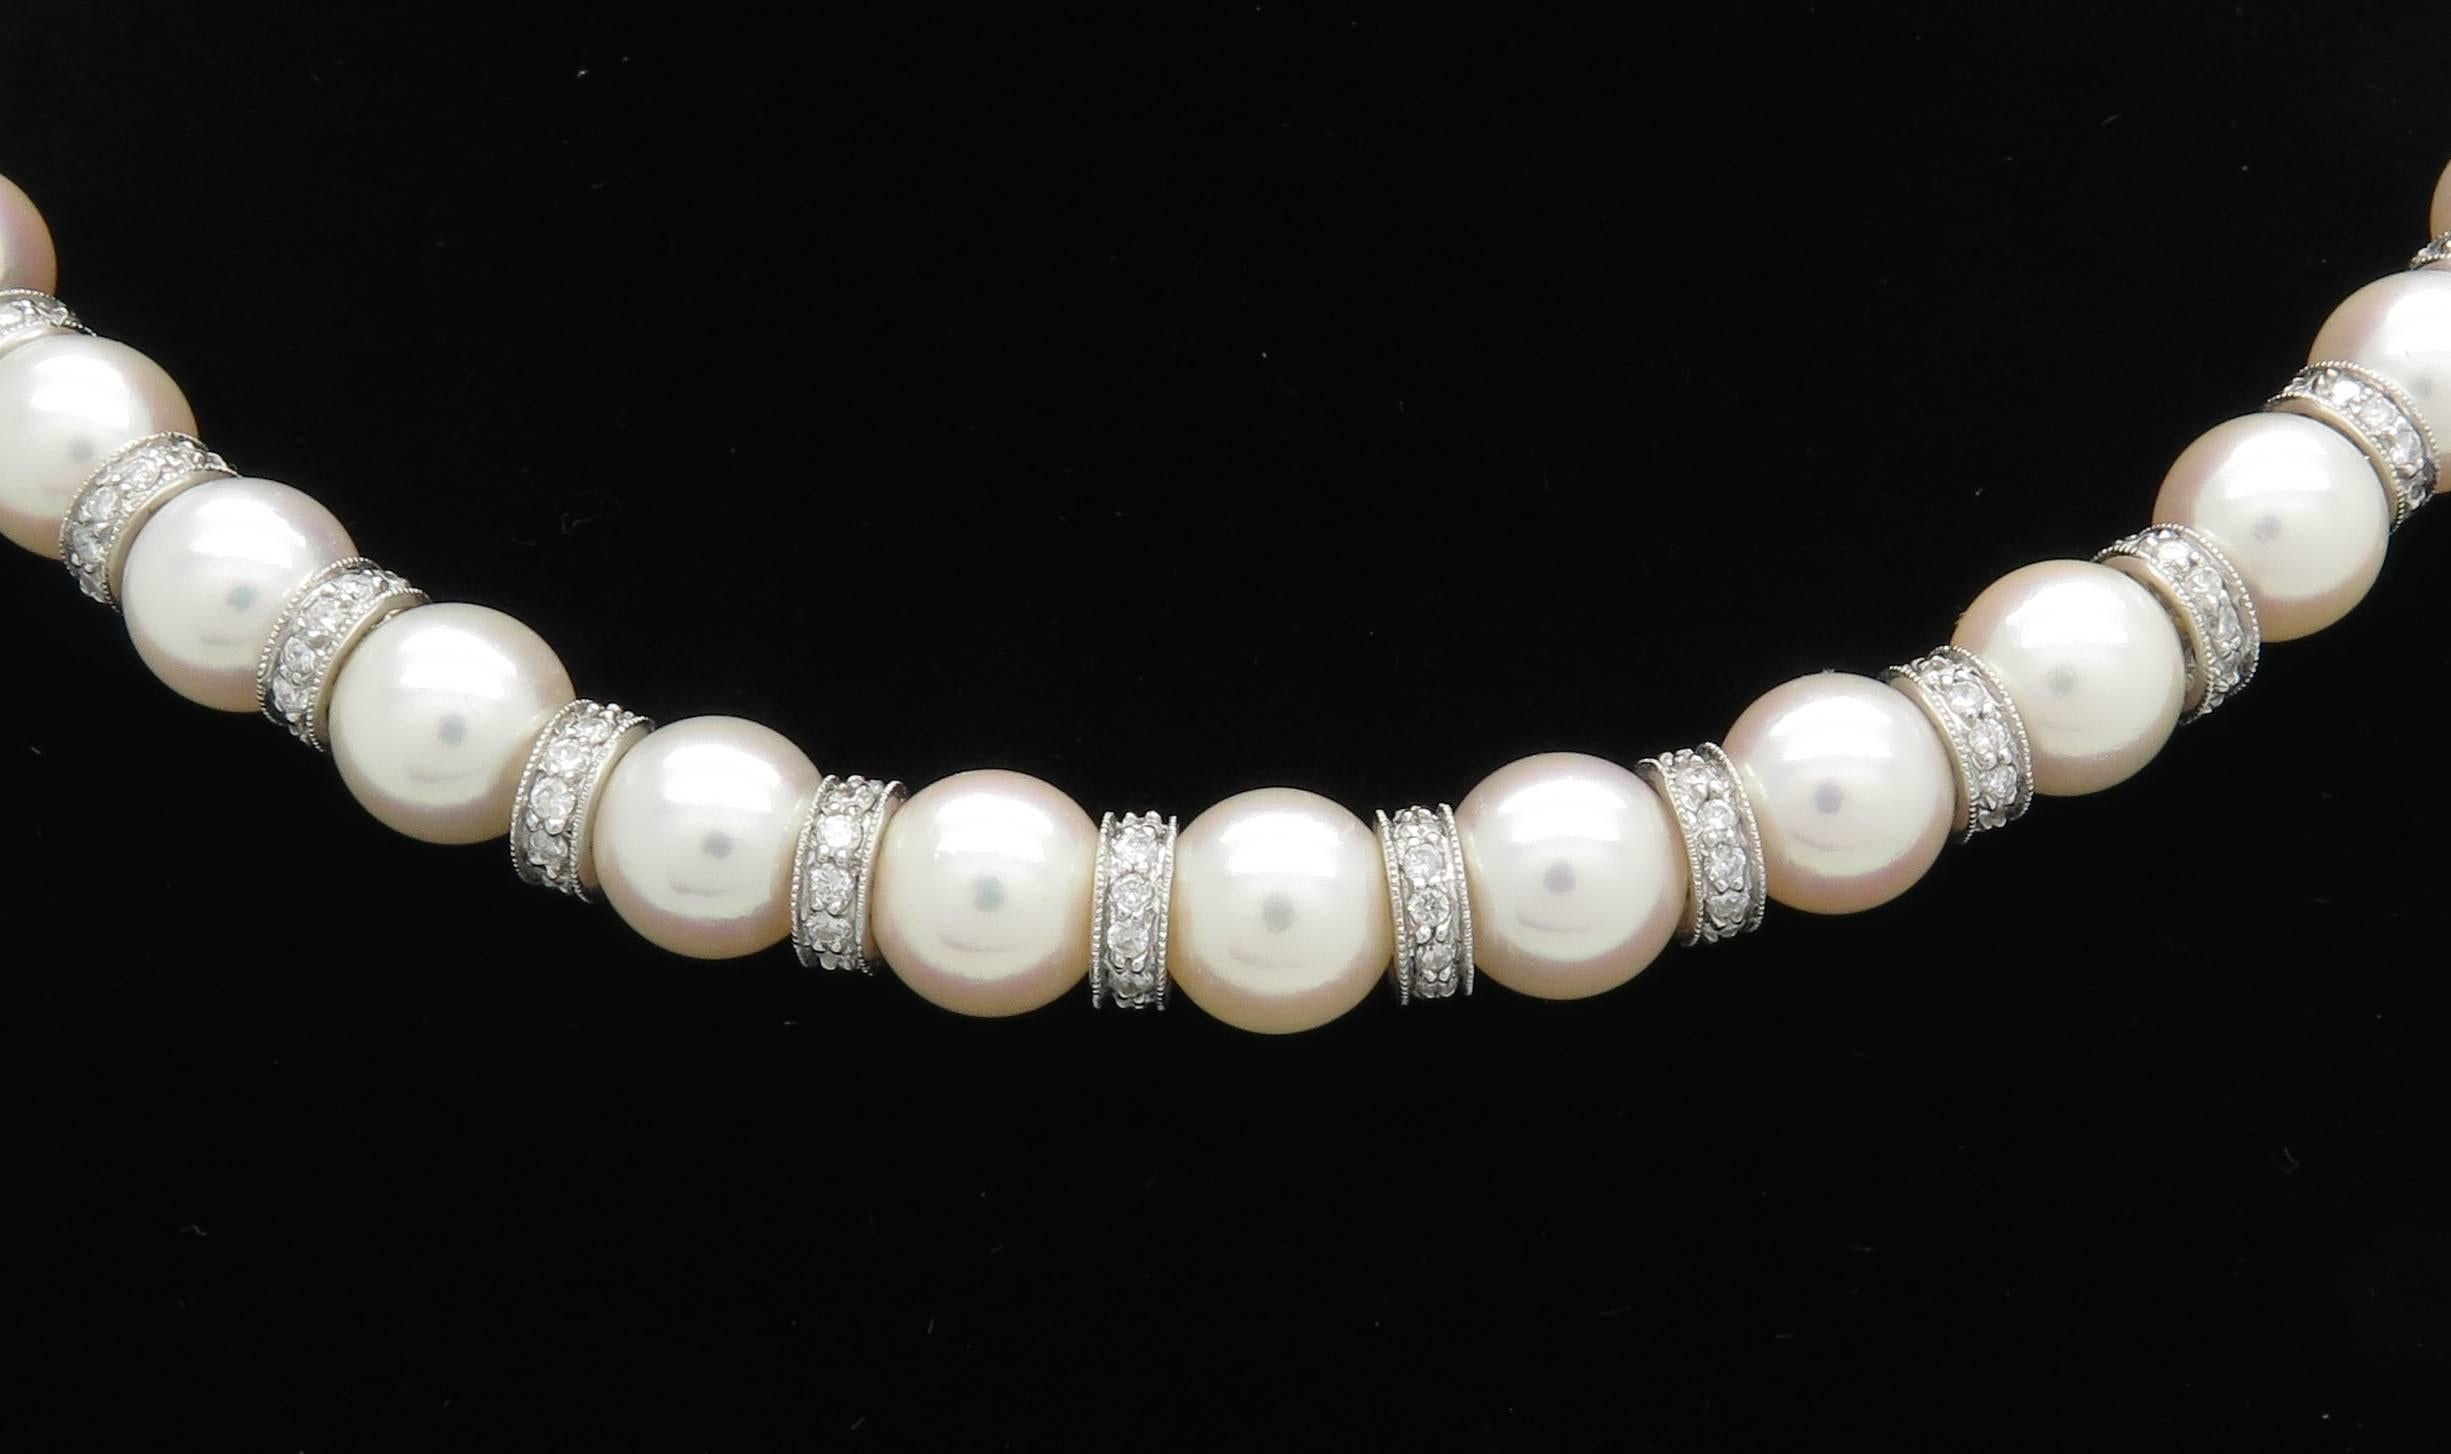 This impressive pearl necklace features 39 well matched 8.5MM pearls. There are 240 Round Brilliant Cut Diamonds throughout the necklace. The diamonds have F-H color and VS to SI clarity. The total diamond weight is approximately 3.60CTW. The 14K